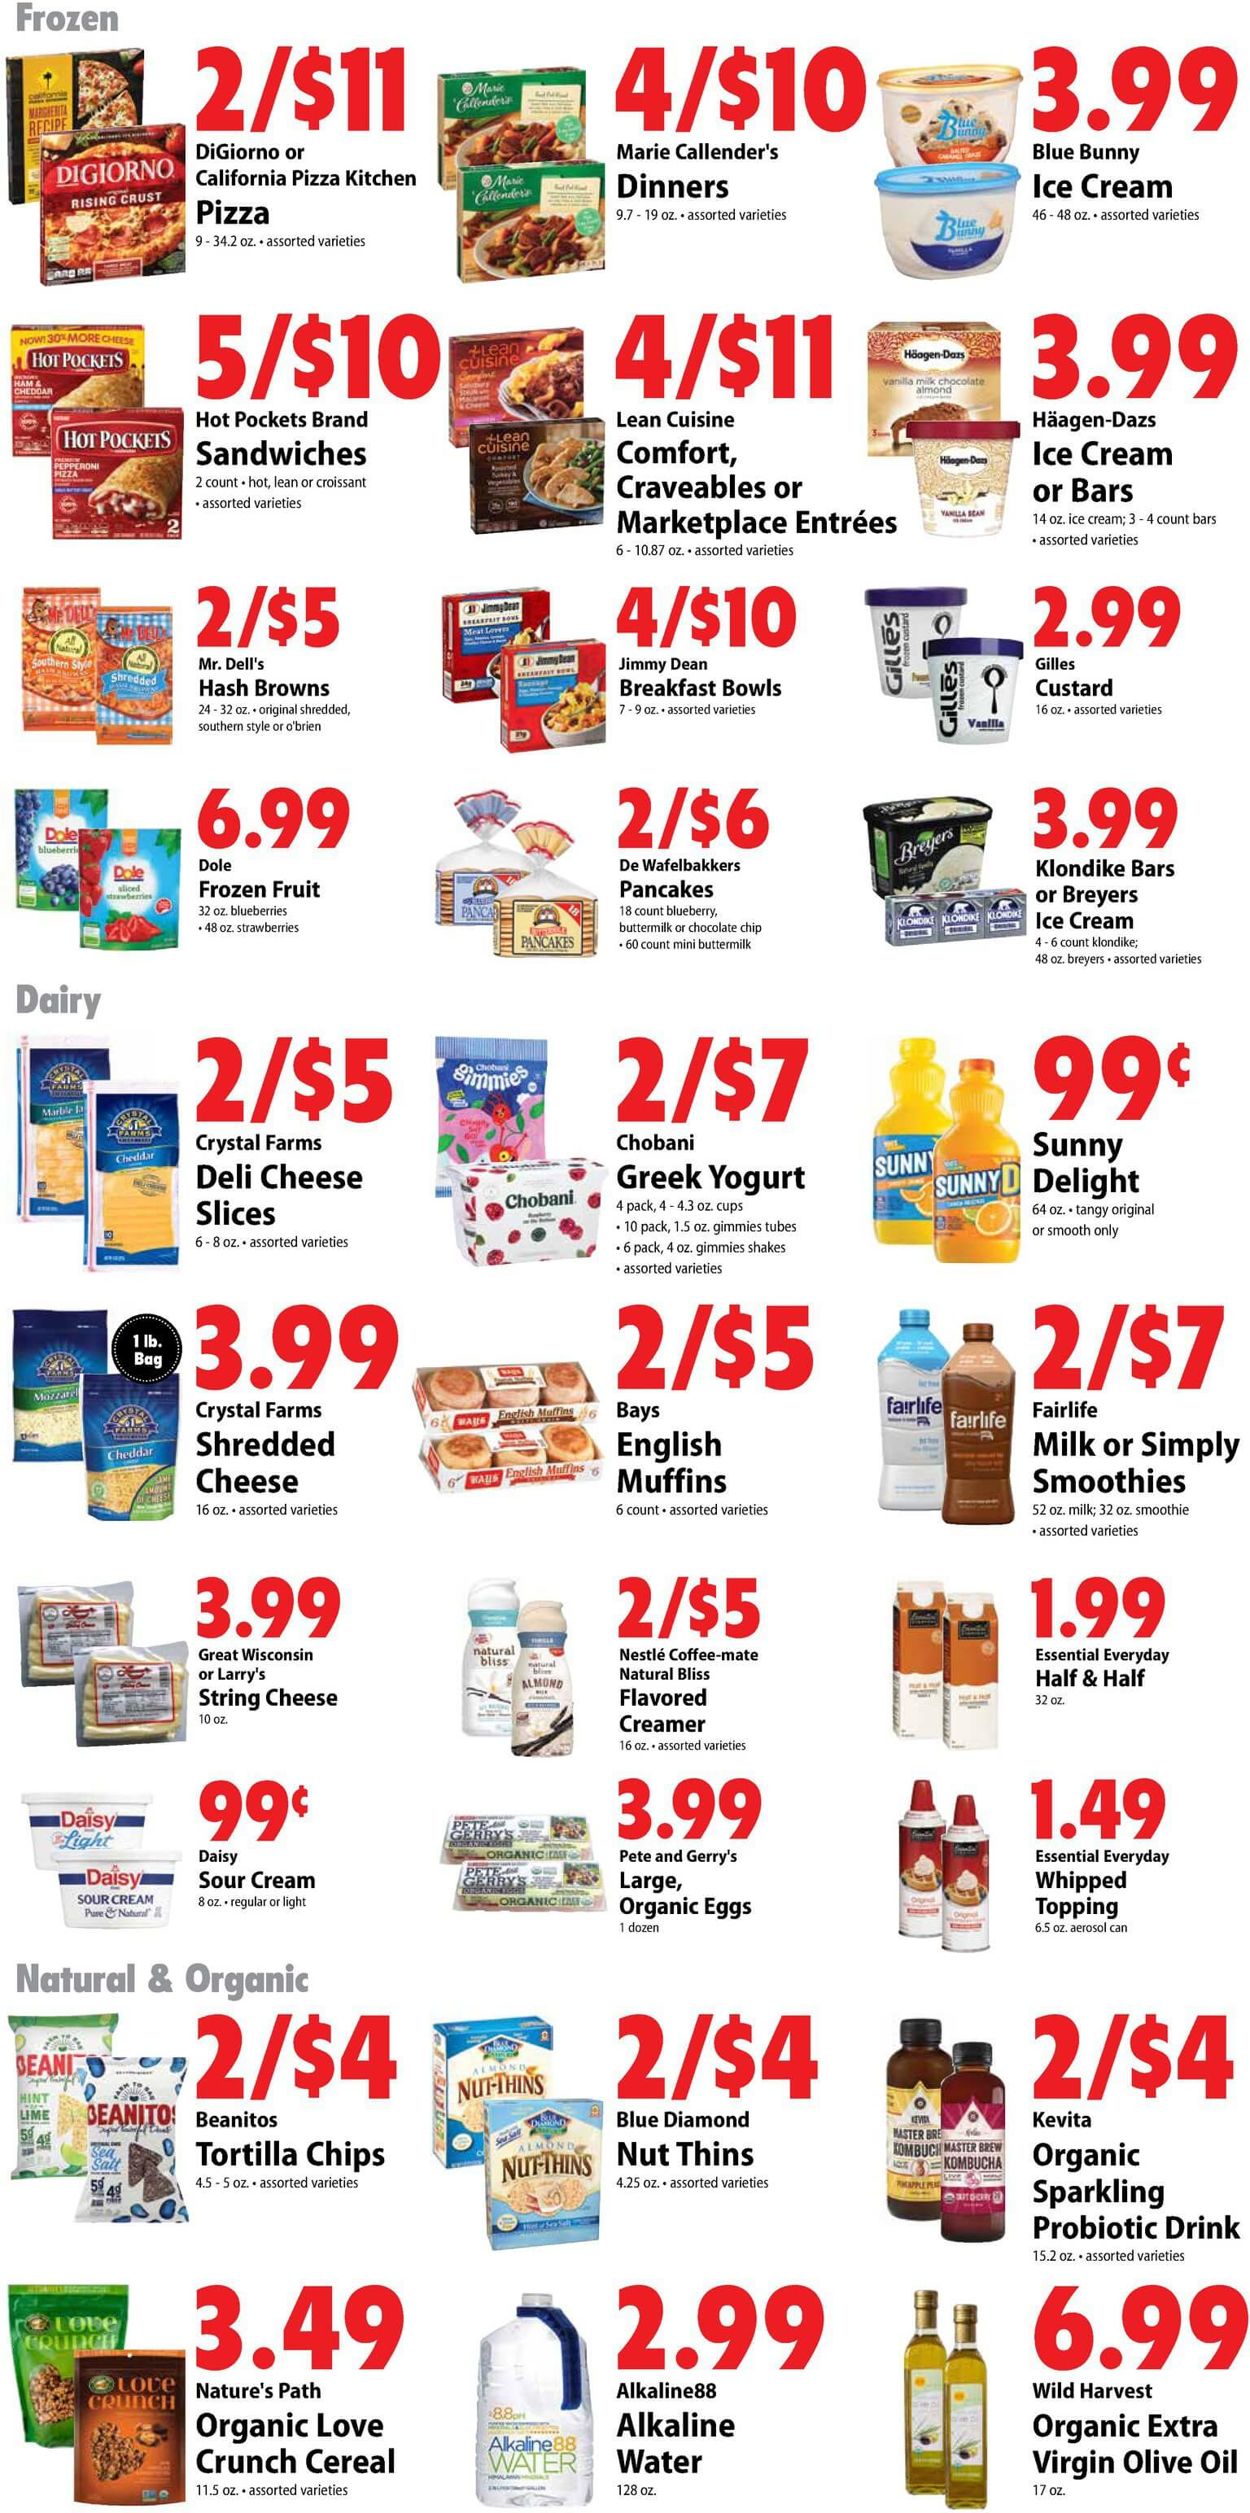 Festival Foods Current weekly ad 11/06 - 11/12/2019 [7] - frequent-ads.com